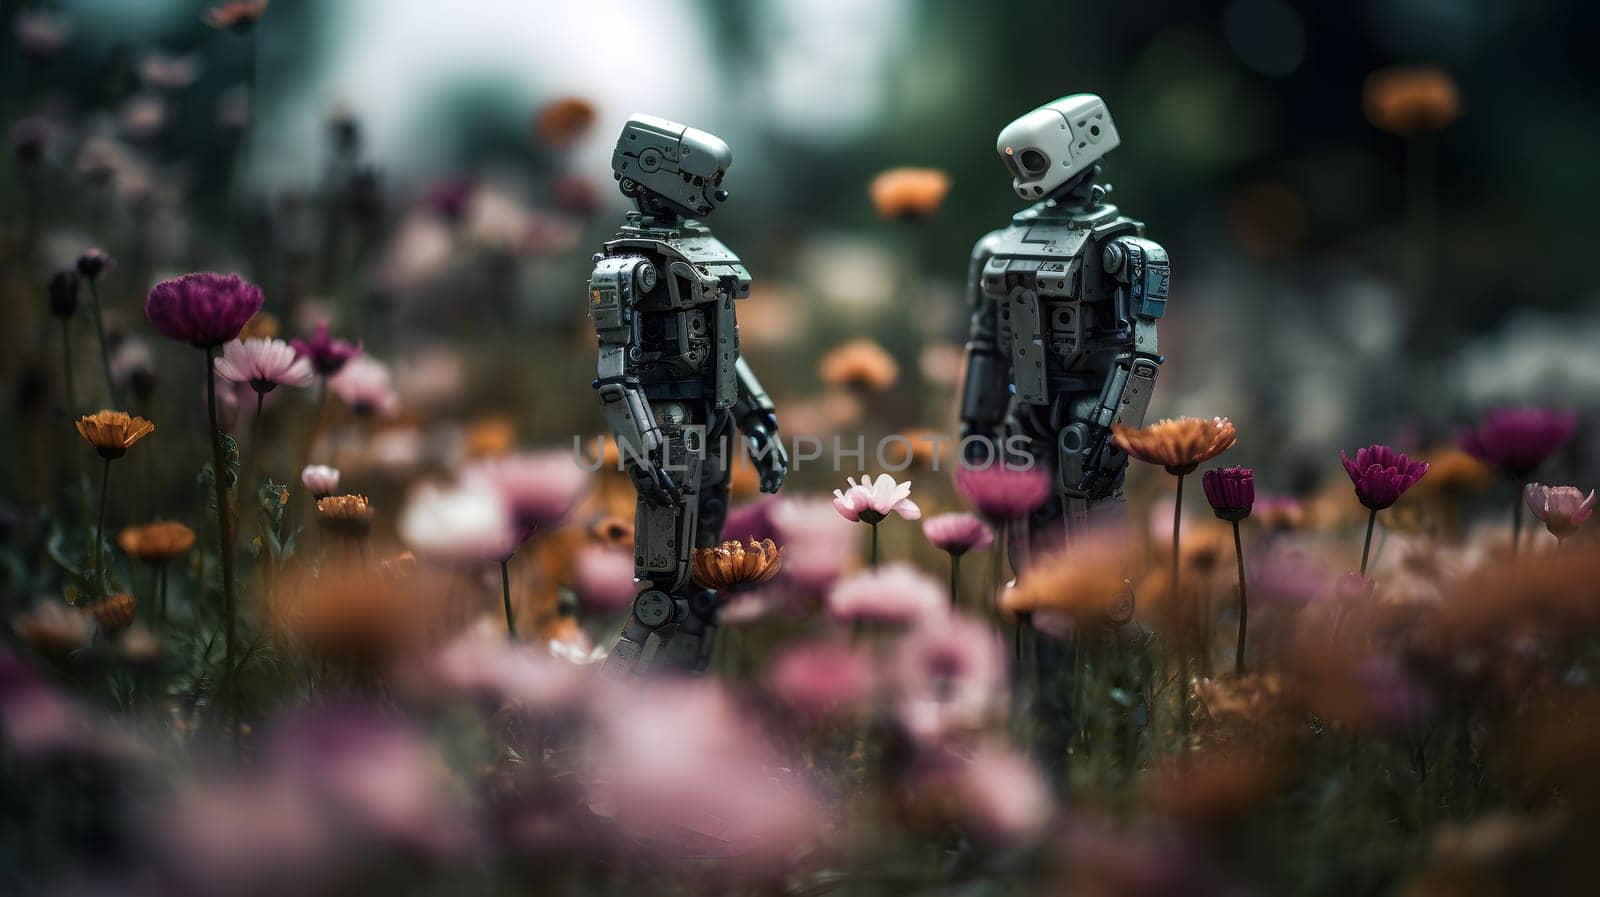 The future of androids in the style of floral surrealism. Neural network generated in May 2023. Not based on any actual person, scene or pattern.